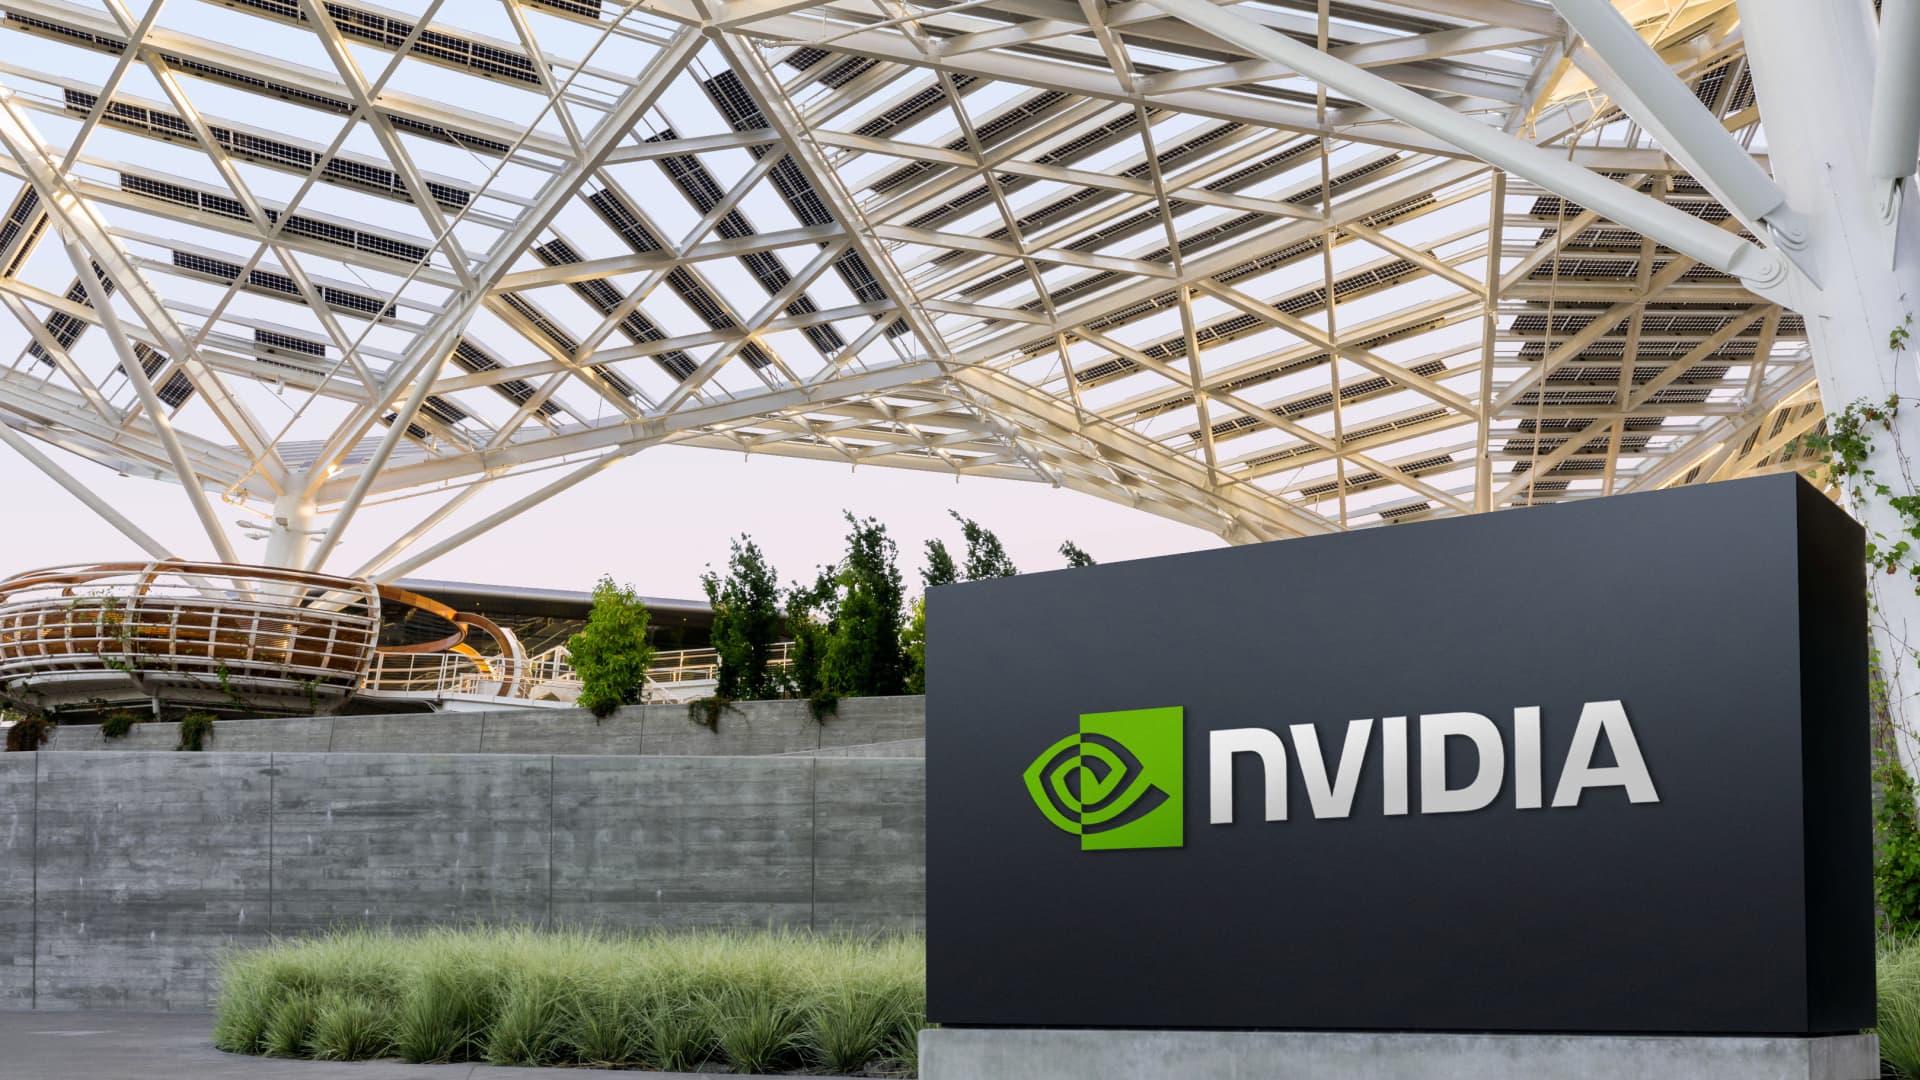 Stocks making the biggest moves midday: Nvidia, First Republic, Nike, GameStop and more